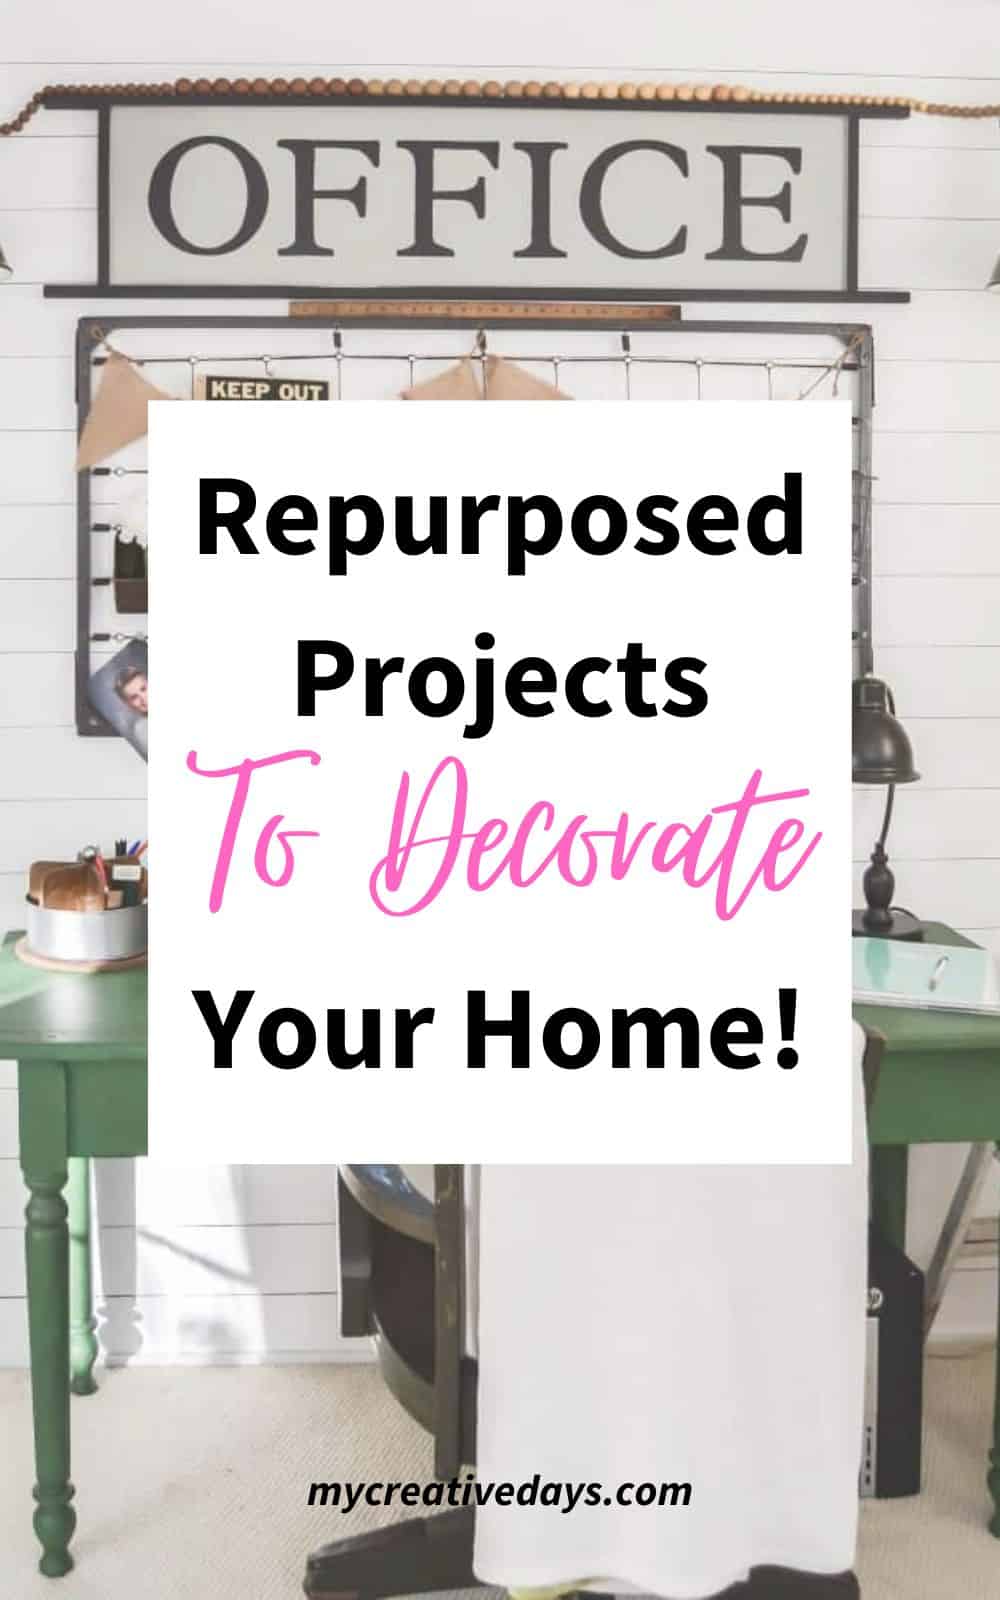 These Repurposed Projects To Decorate Your Home are easy ways to upcycle something you may already have into amazing decor for your home!